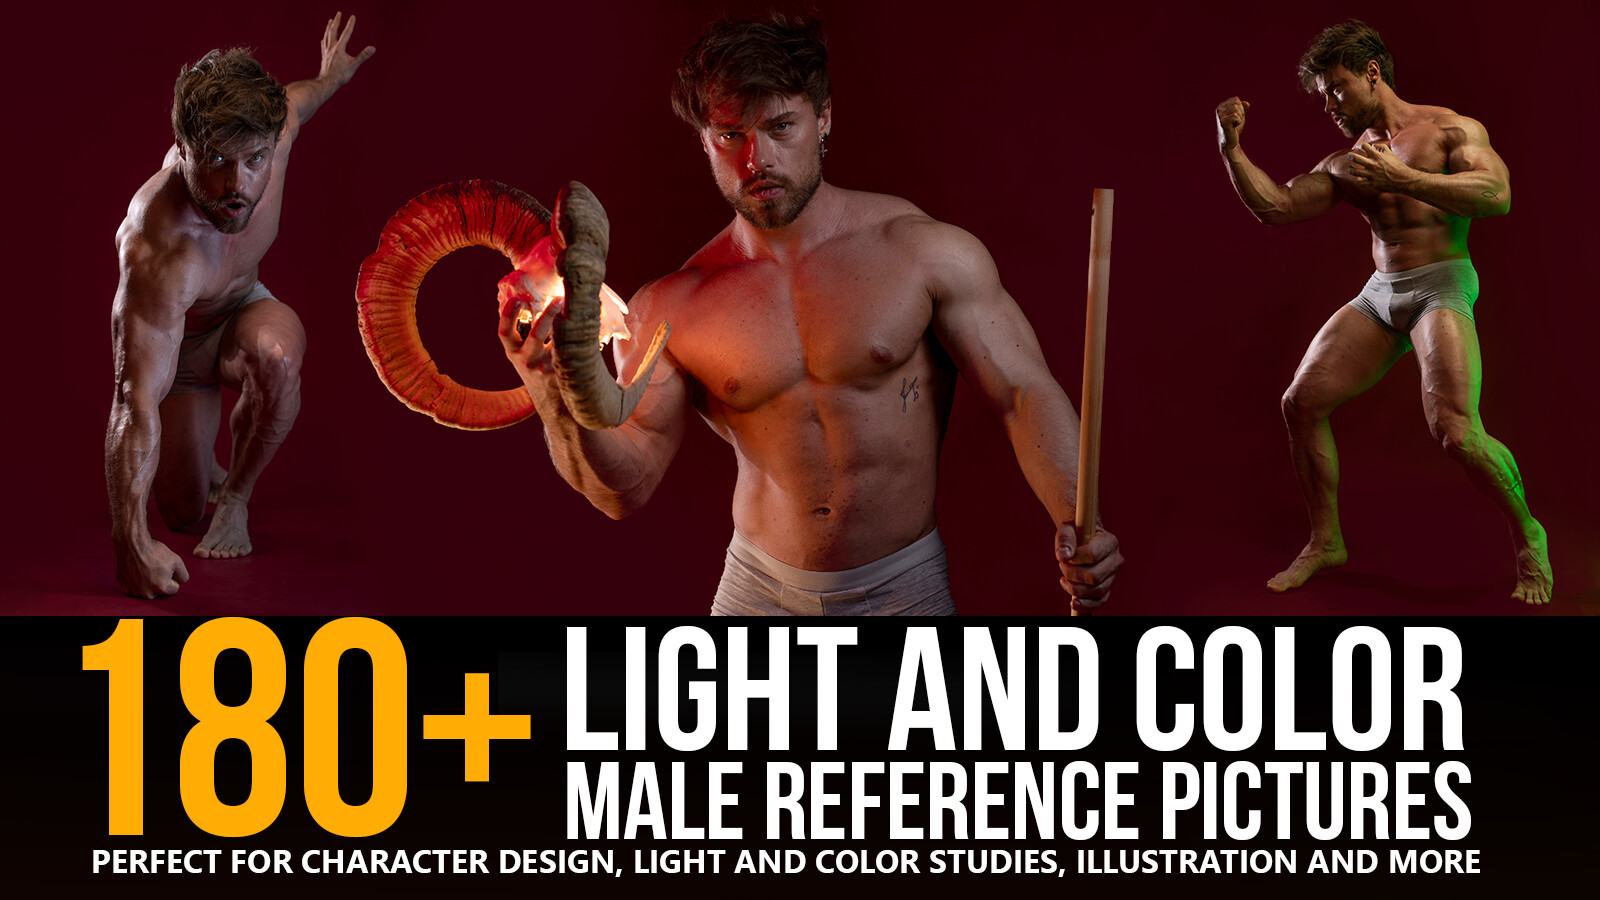 180+ LIGHT AND COLOR MALE REFERENCE PICTURES BY GRAFIT STUDIO[ARTSTATION]